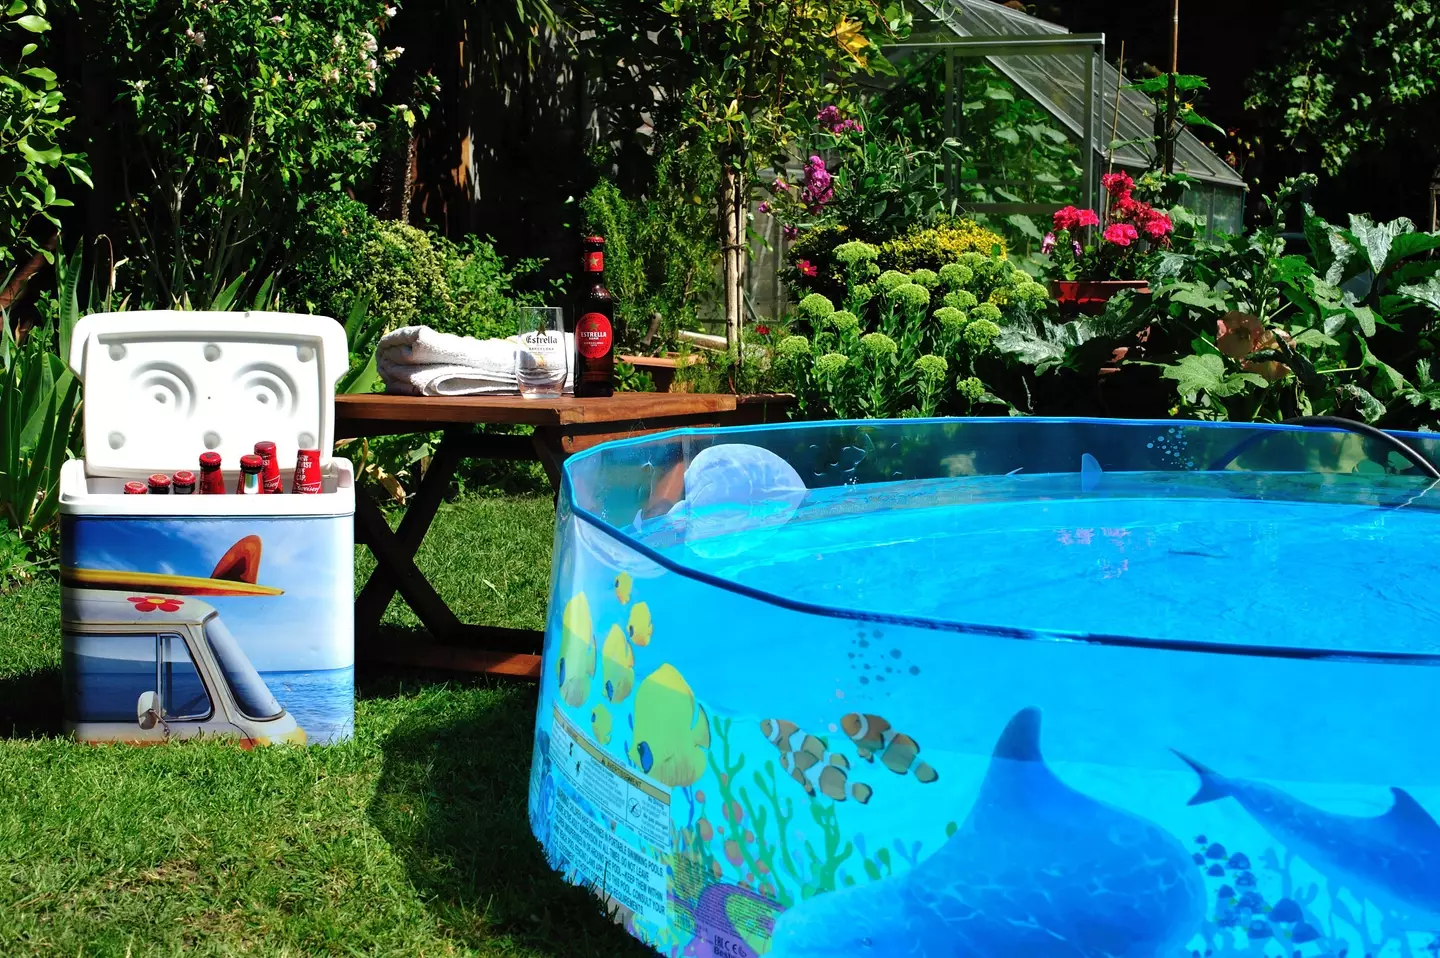 Anglian Water said a standard paddling pool can use up to 400 litres of water.